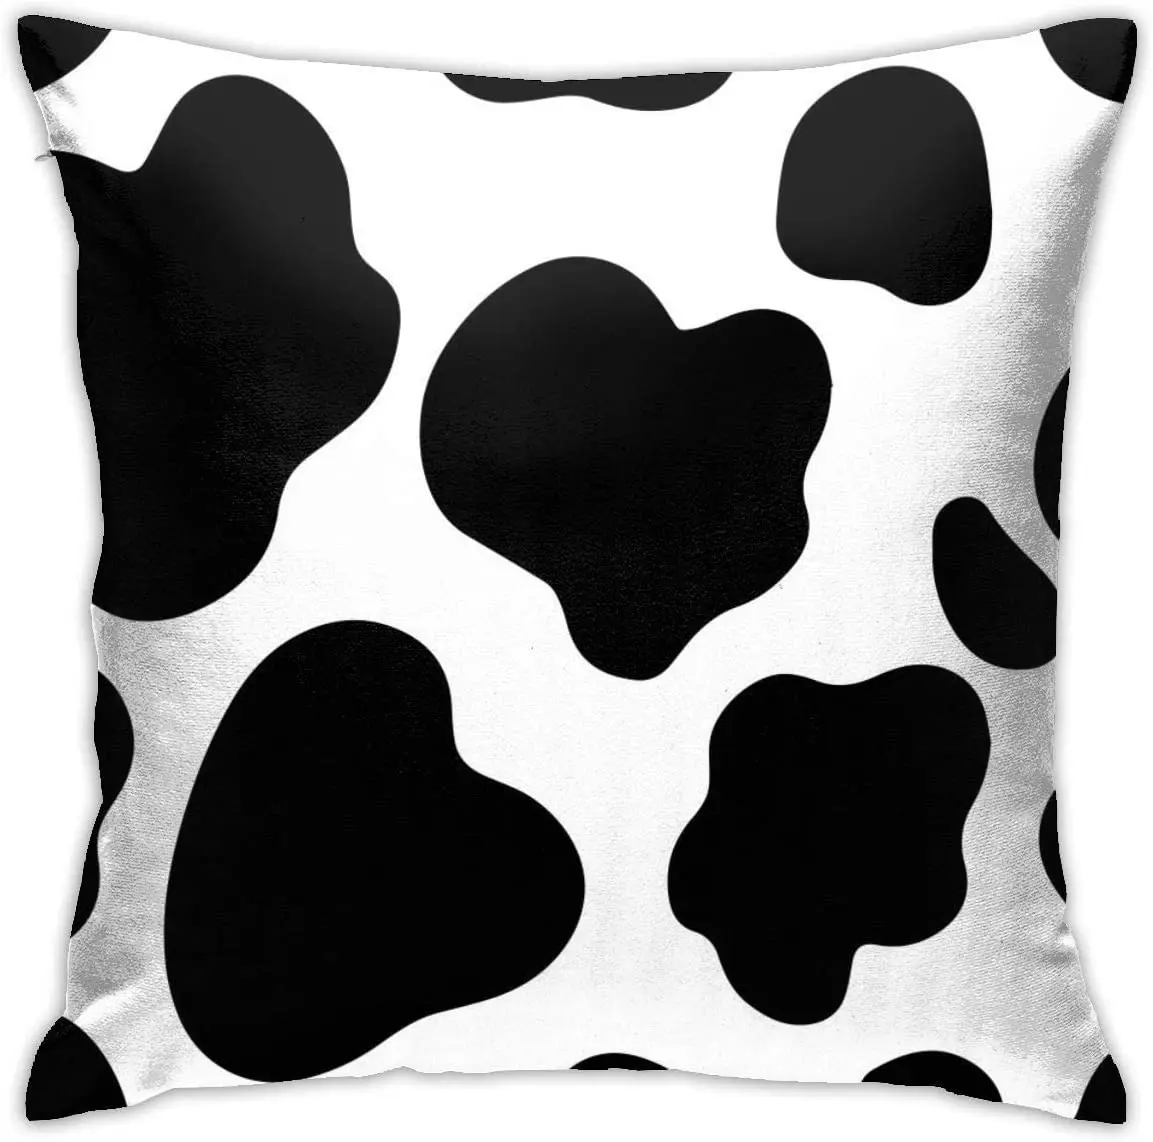 

Cows Print Throw Pillow Covers Decorative 18x18 Inch Pillowcase Square Cushion Cases for Home Sofa Bedroom Livingroom